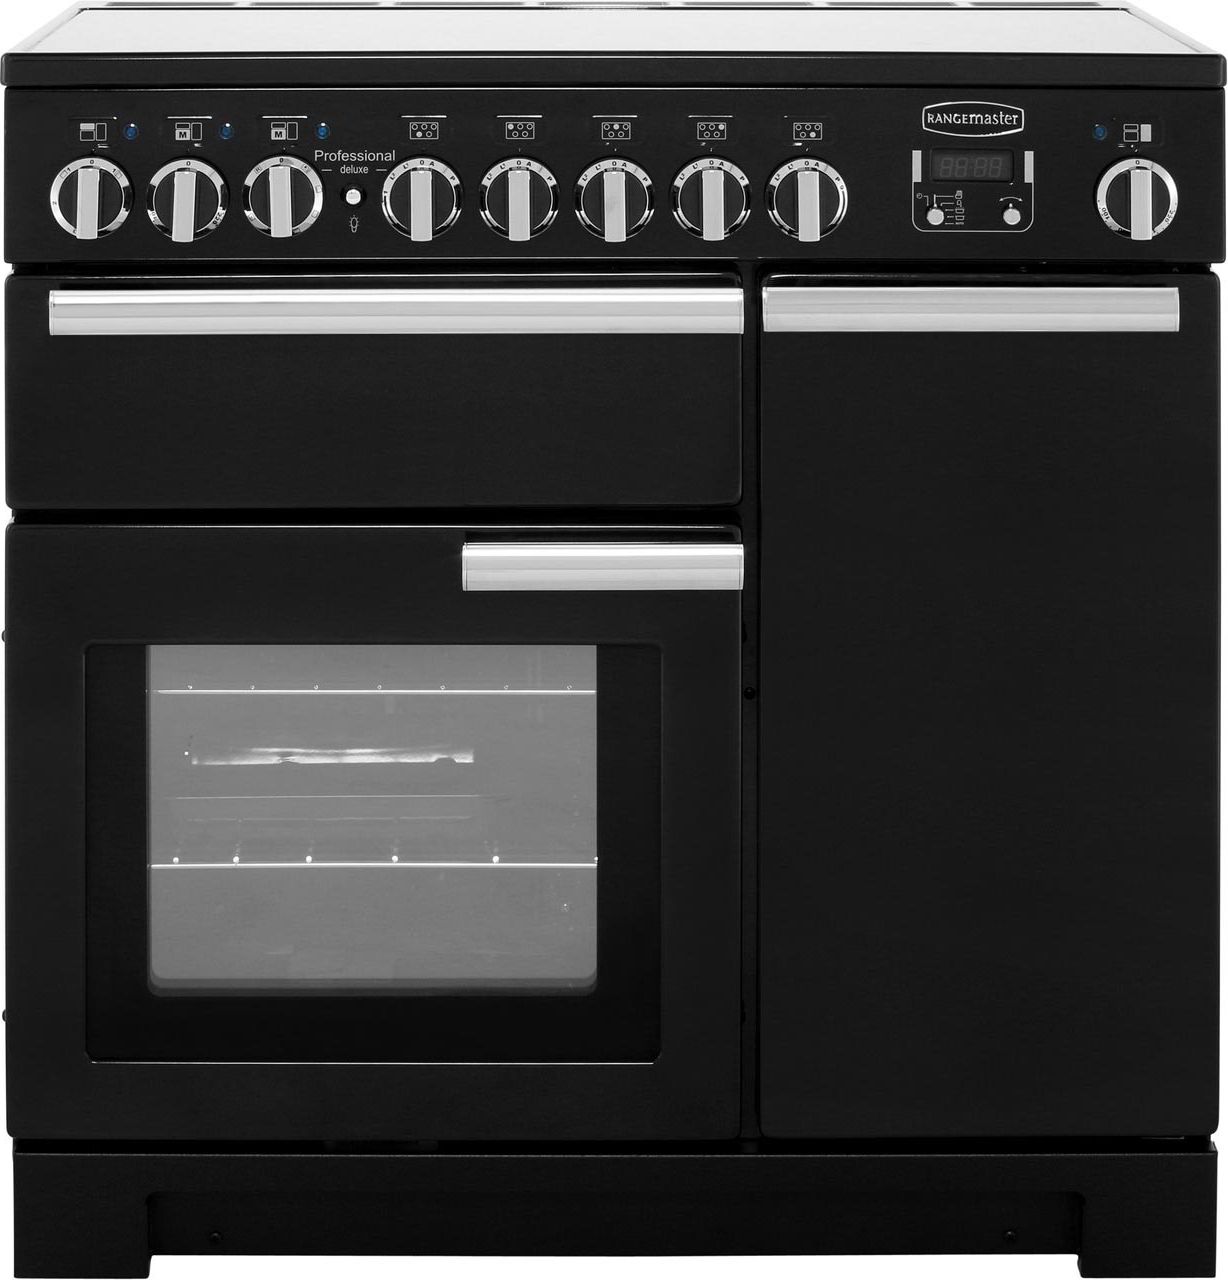 Rangemaster Professional Deluxe PDL90EIGB/C 90cm Electric Range Cooker with Induction Hob - Black / Chrome - A/A Rated, Black